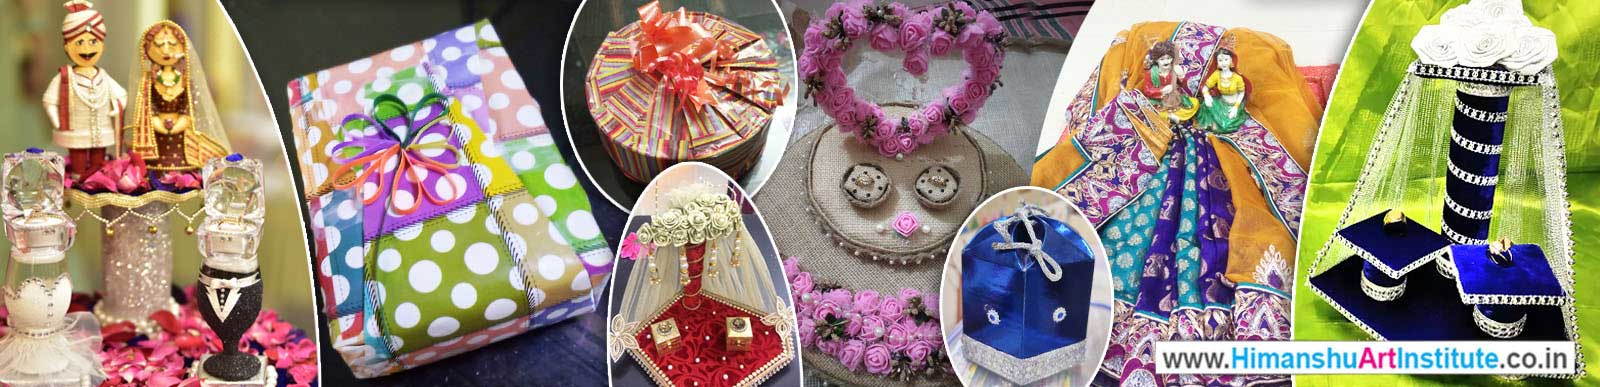 Online Gift Packing Classes, Art & Craft Institute in Delhi, Professional Certificate Course in Gift Packing